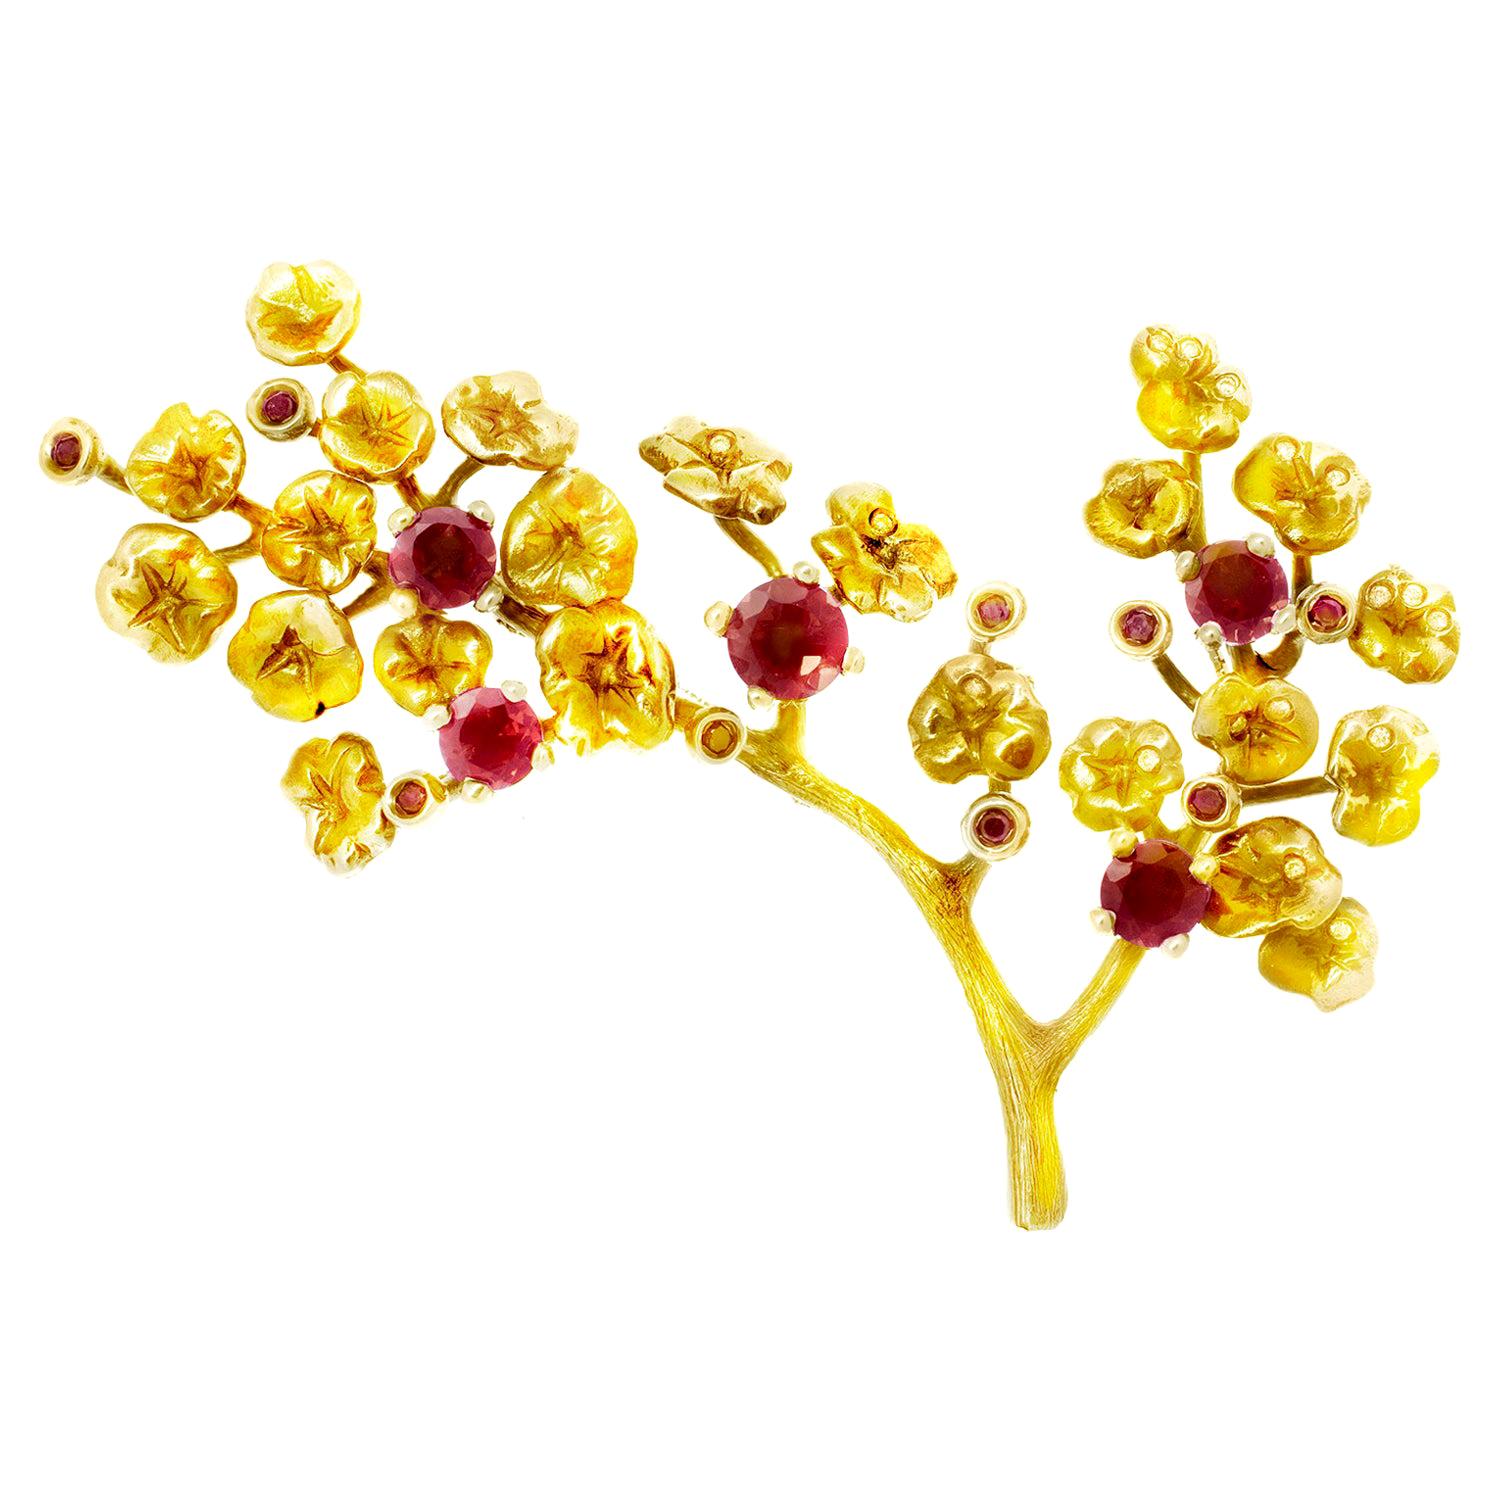 Yellow Gold Heliotrope Brooch by the Artist with Rubies and Diamonds